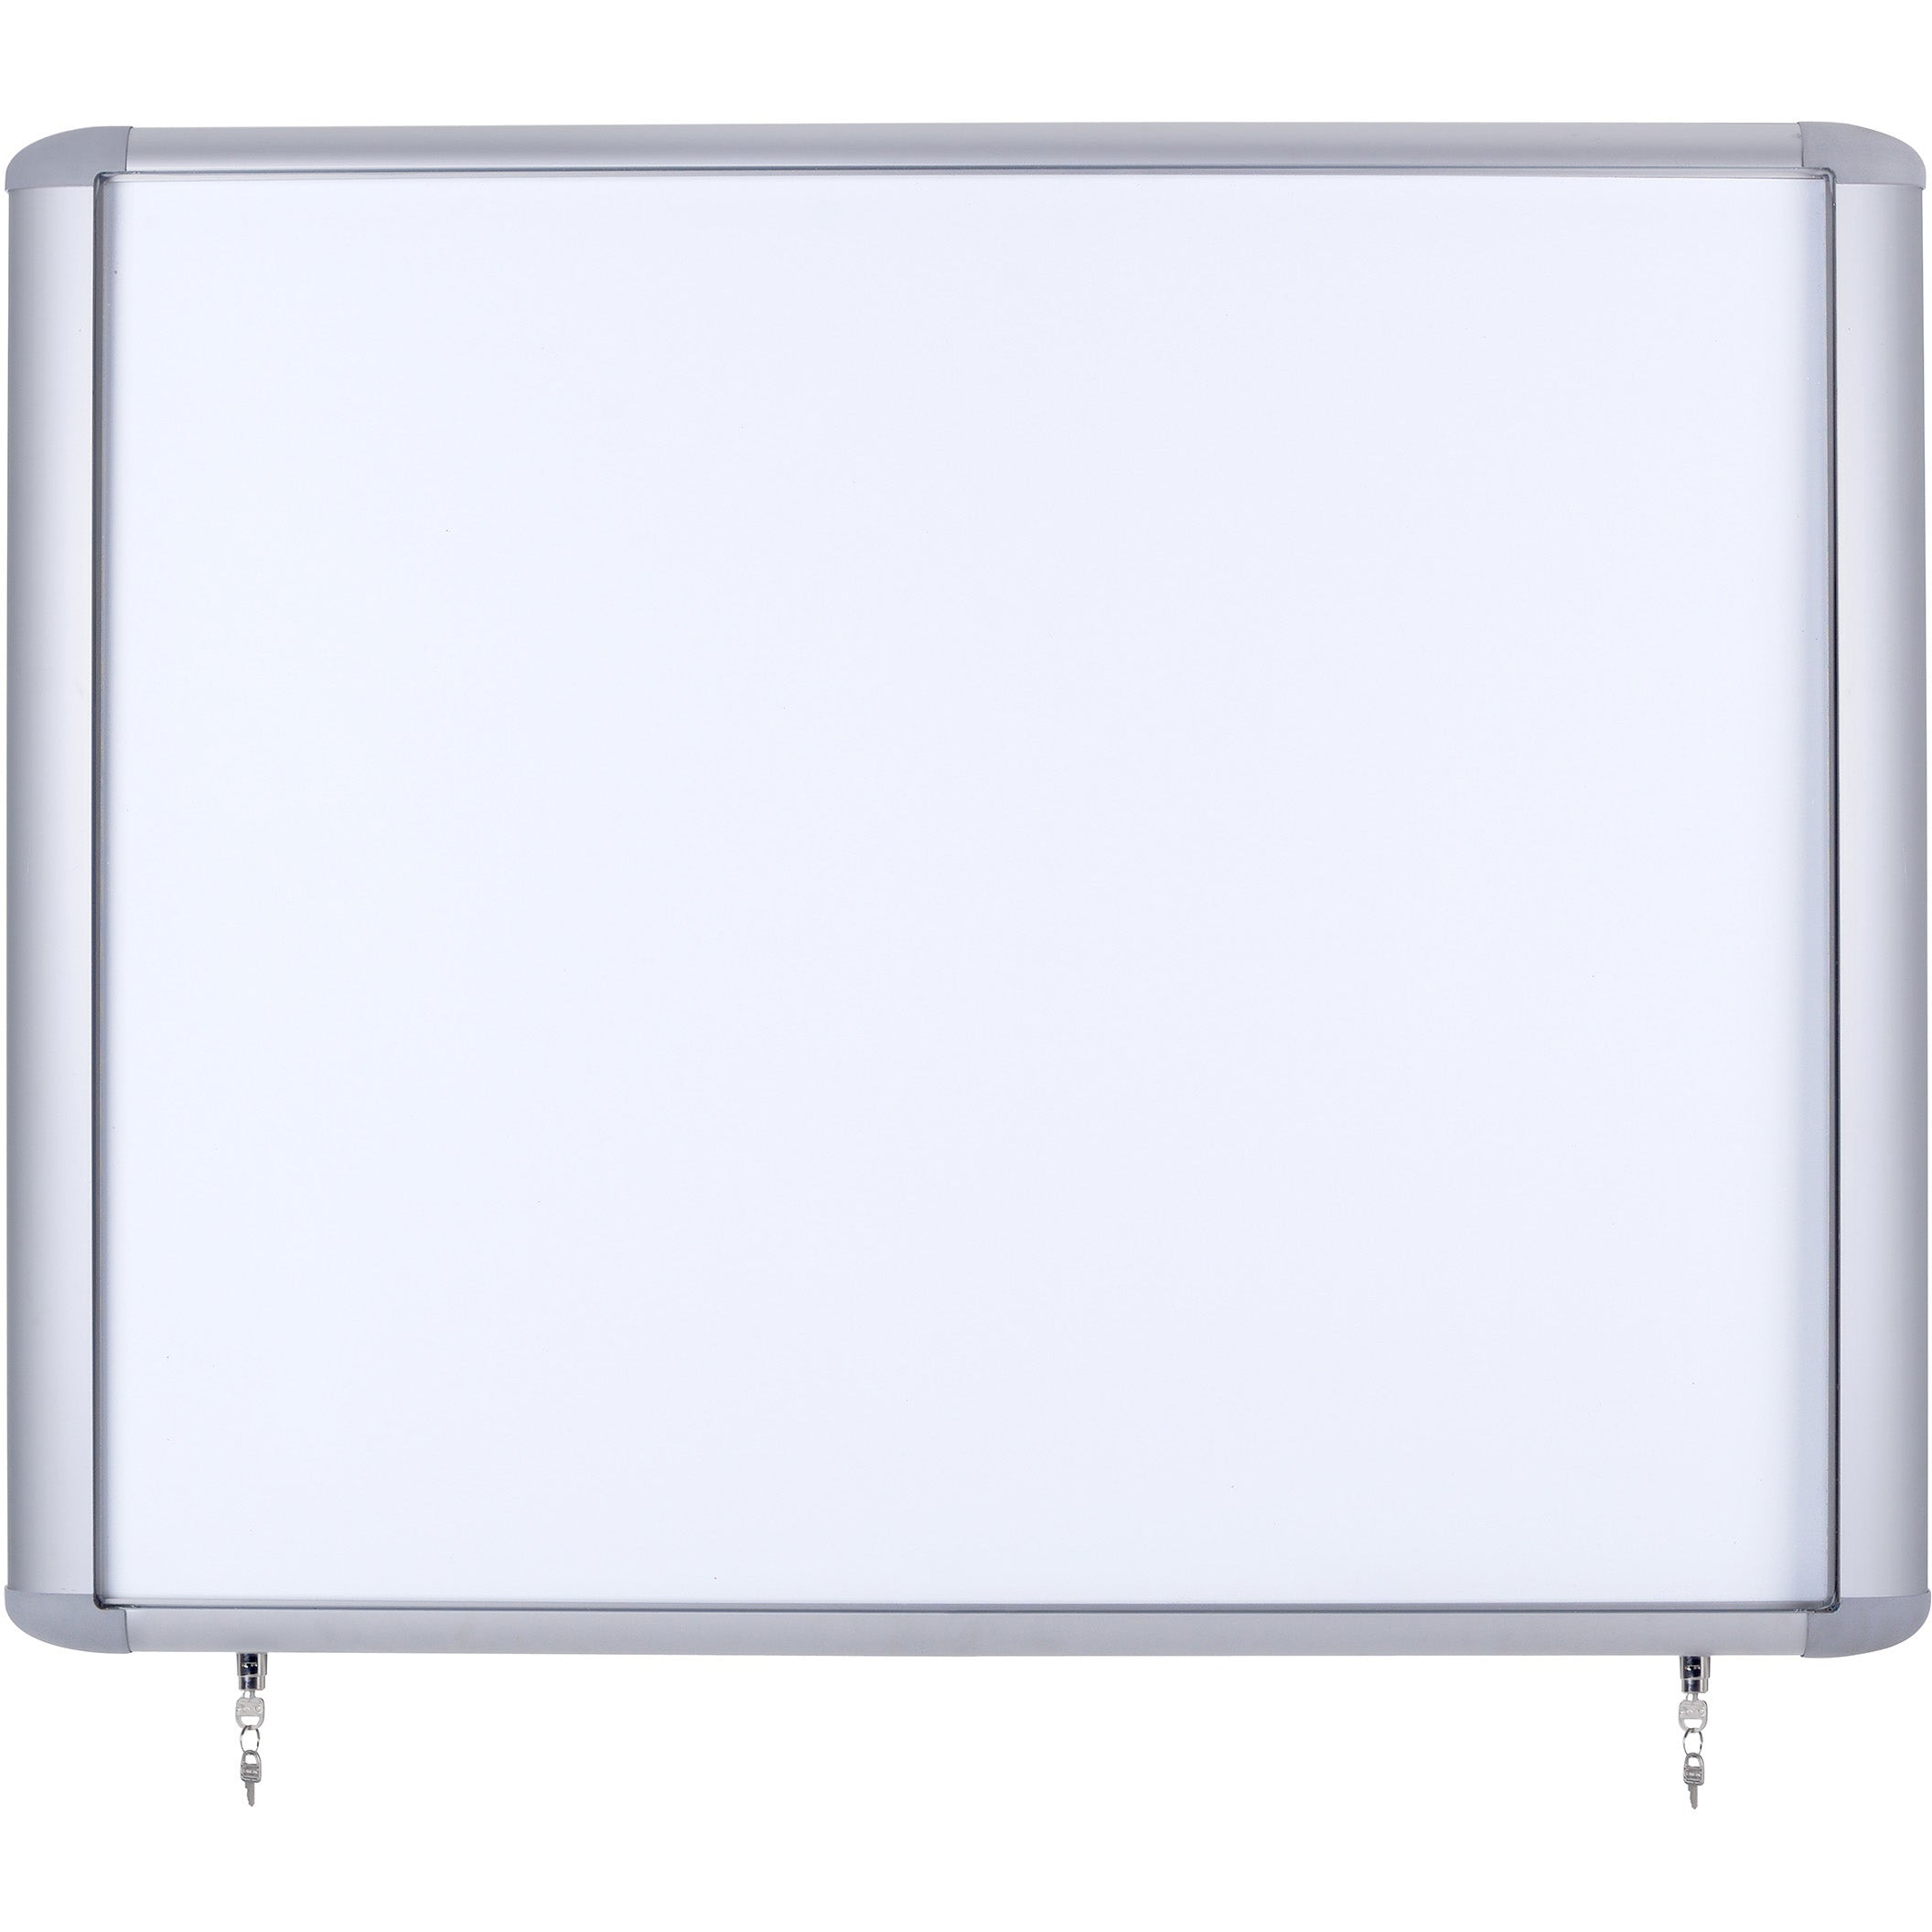 VT340609760 Outdoor Enclosed Top Hinged Door Locking Magnetic Dry Erase Board, Weather Resistant Wall Mounting Whiteboard, 27" x 32", Aluminum Frame by MasterVision